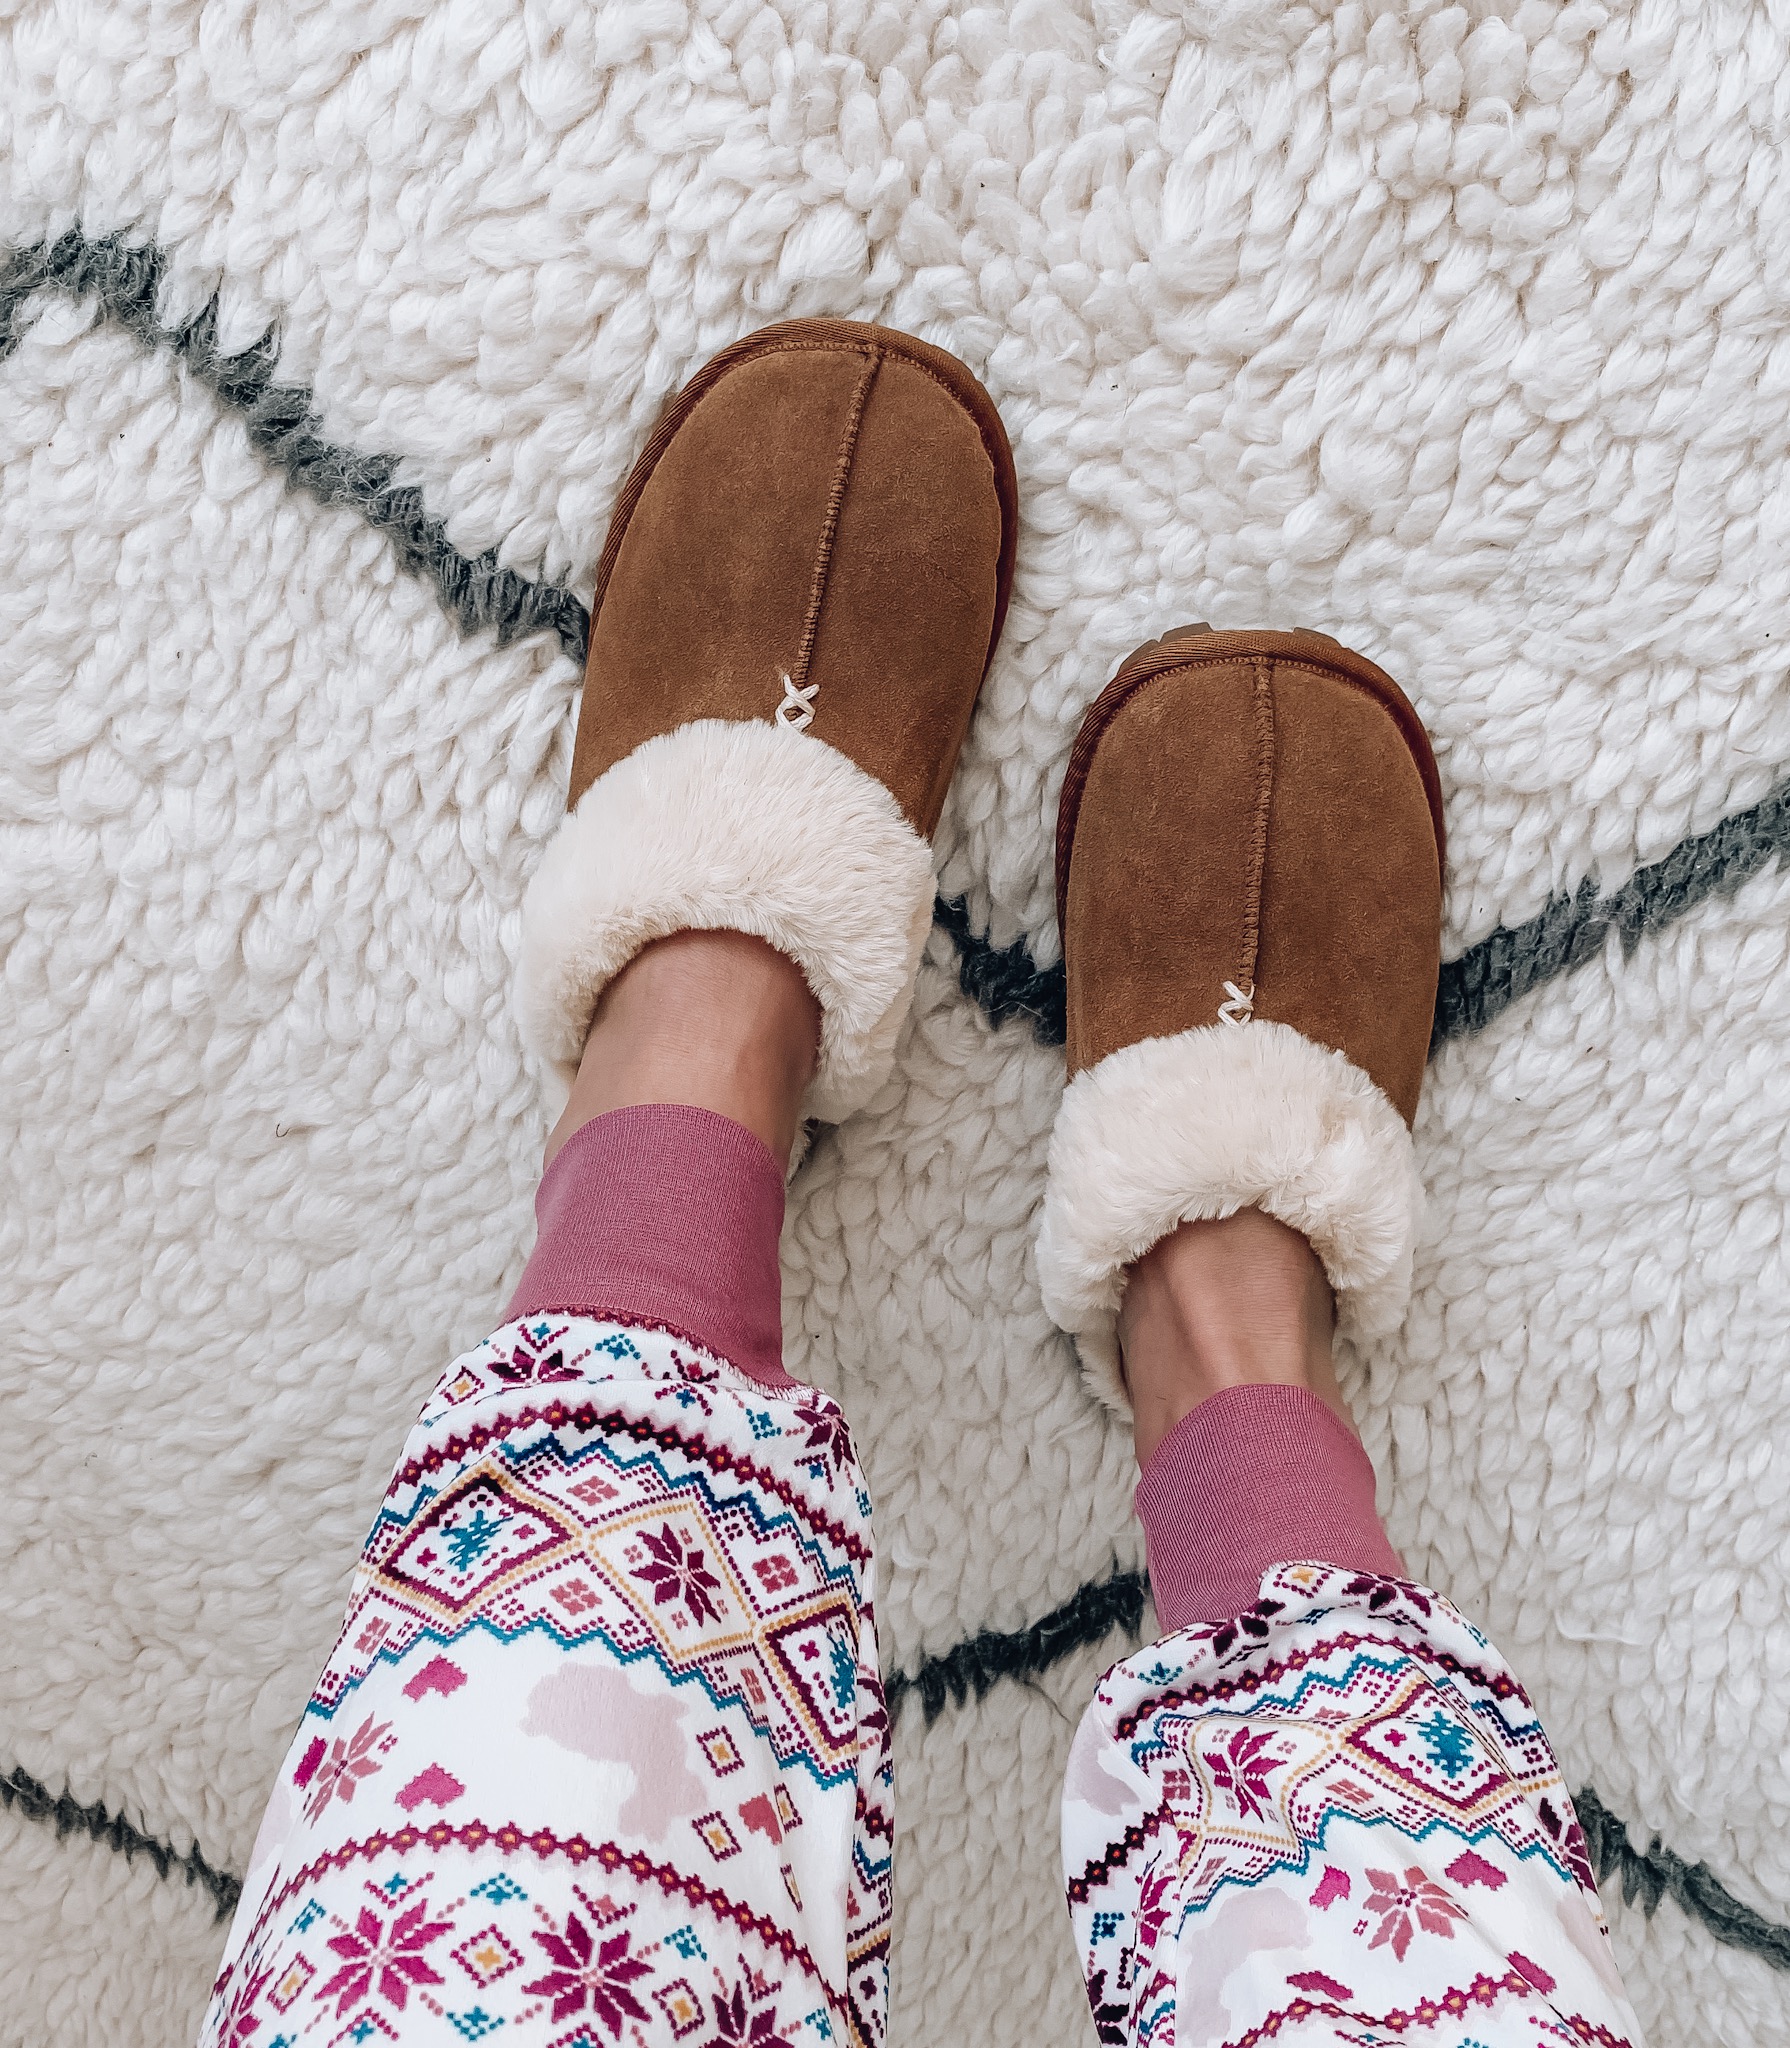 Slippers, Ugg dupe slippers